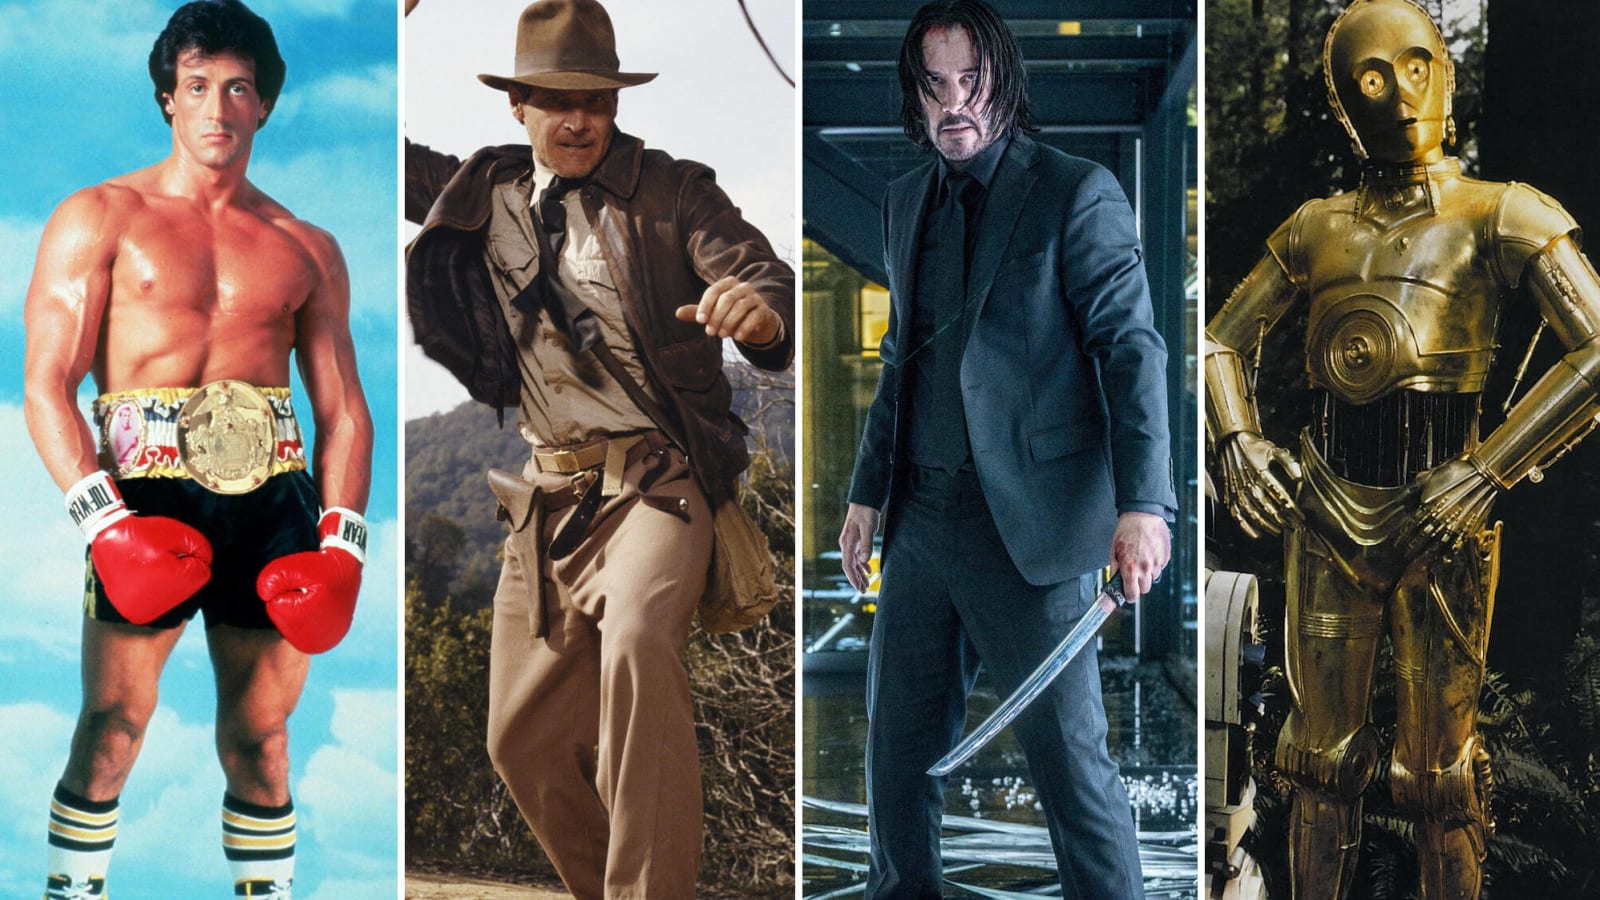 The most memorable third films from movie franchises